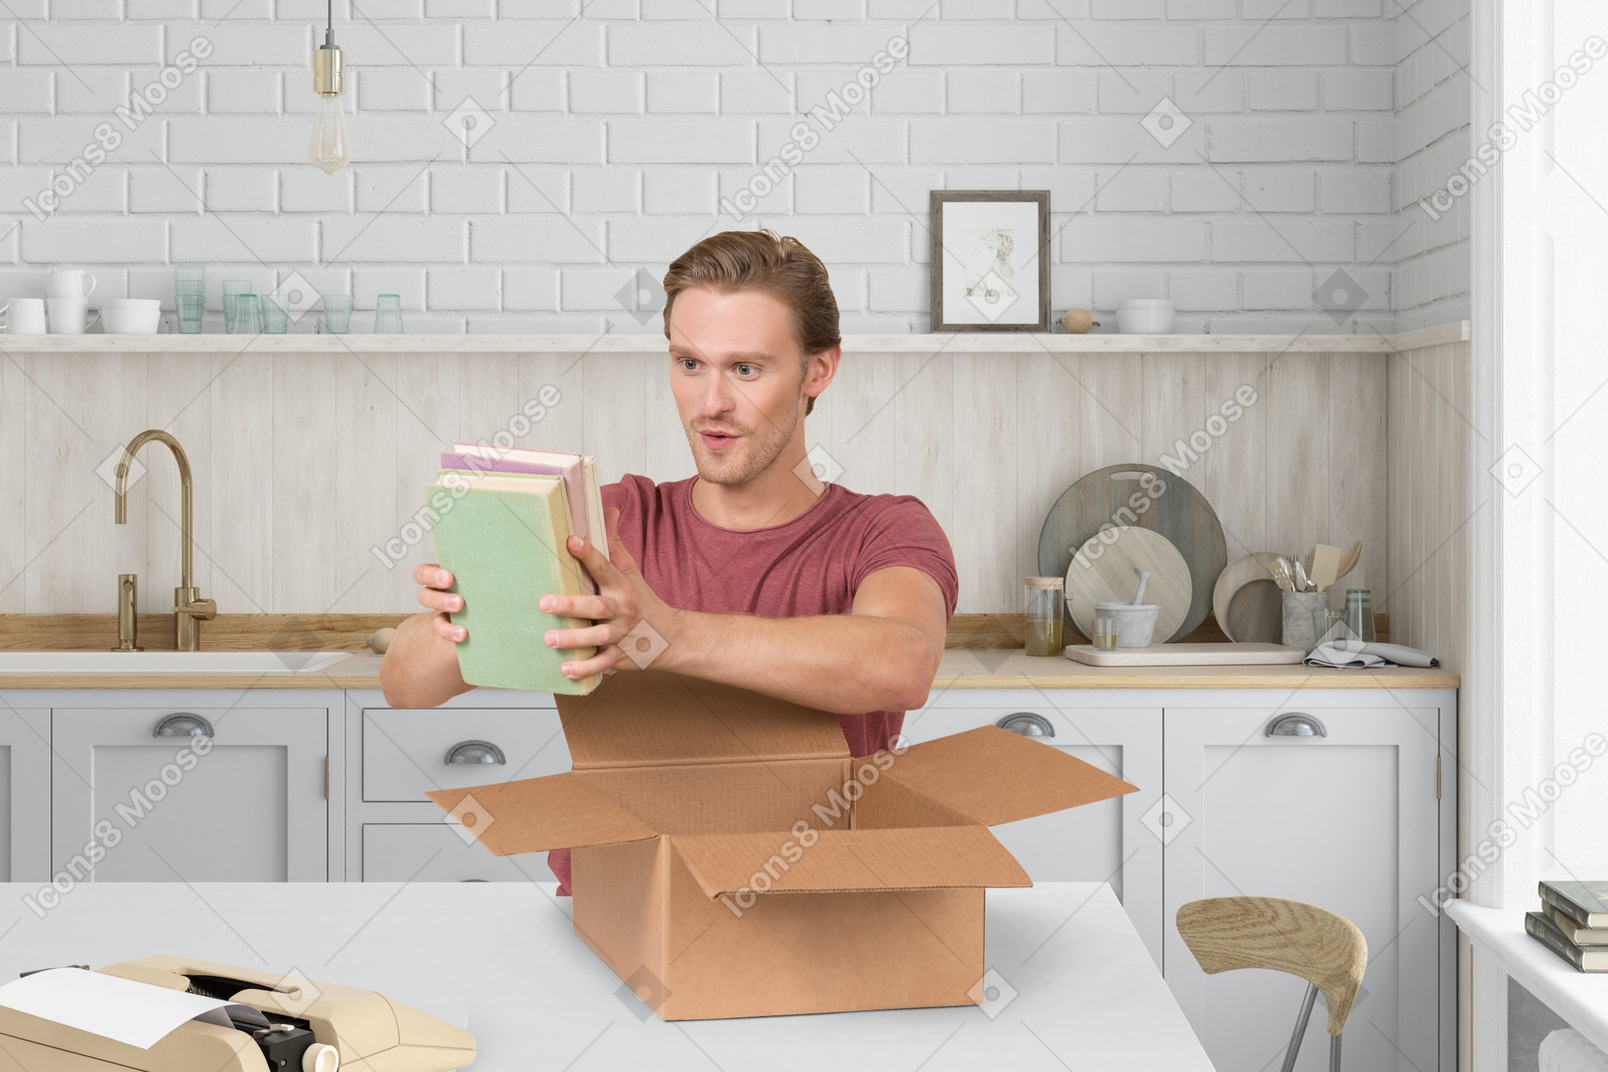 A man taking books out of a box